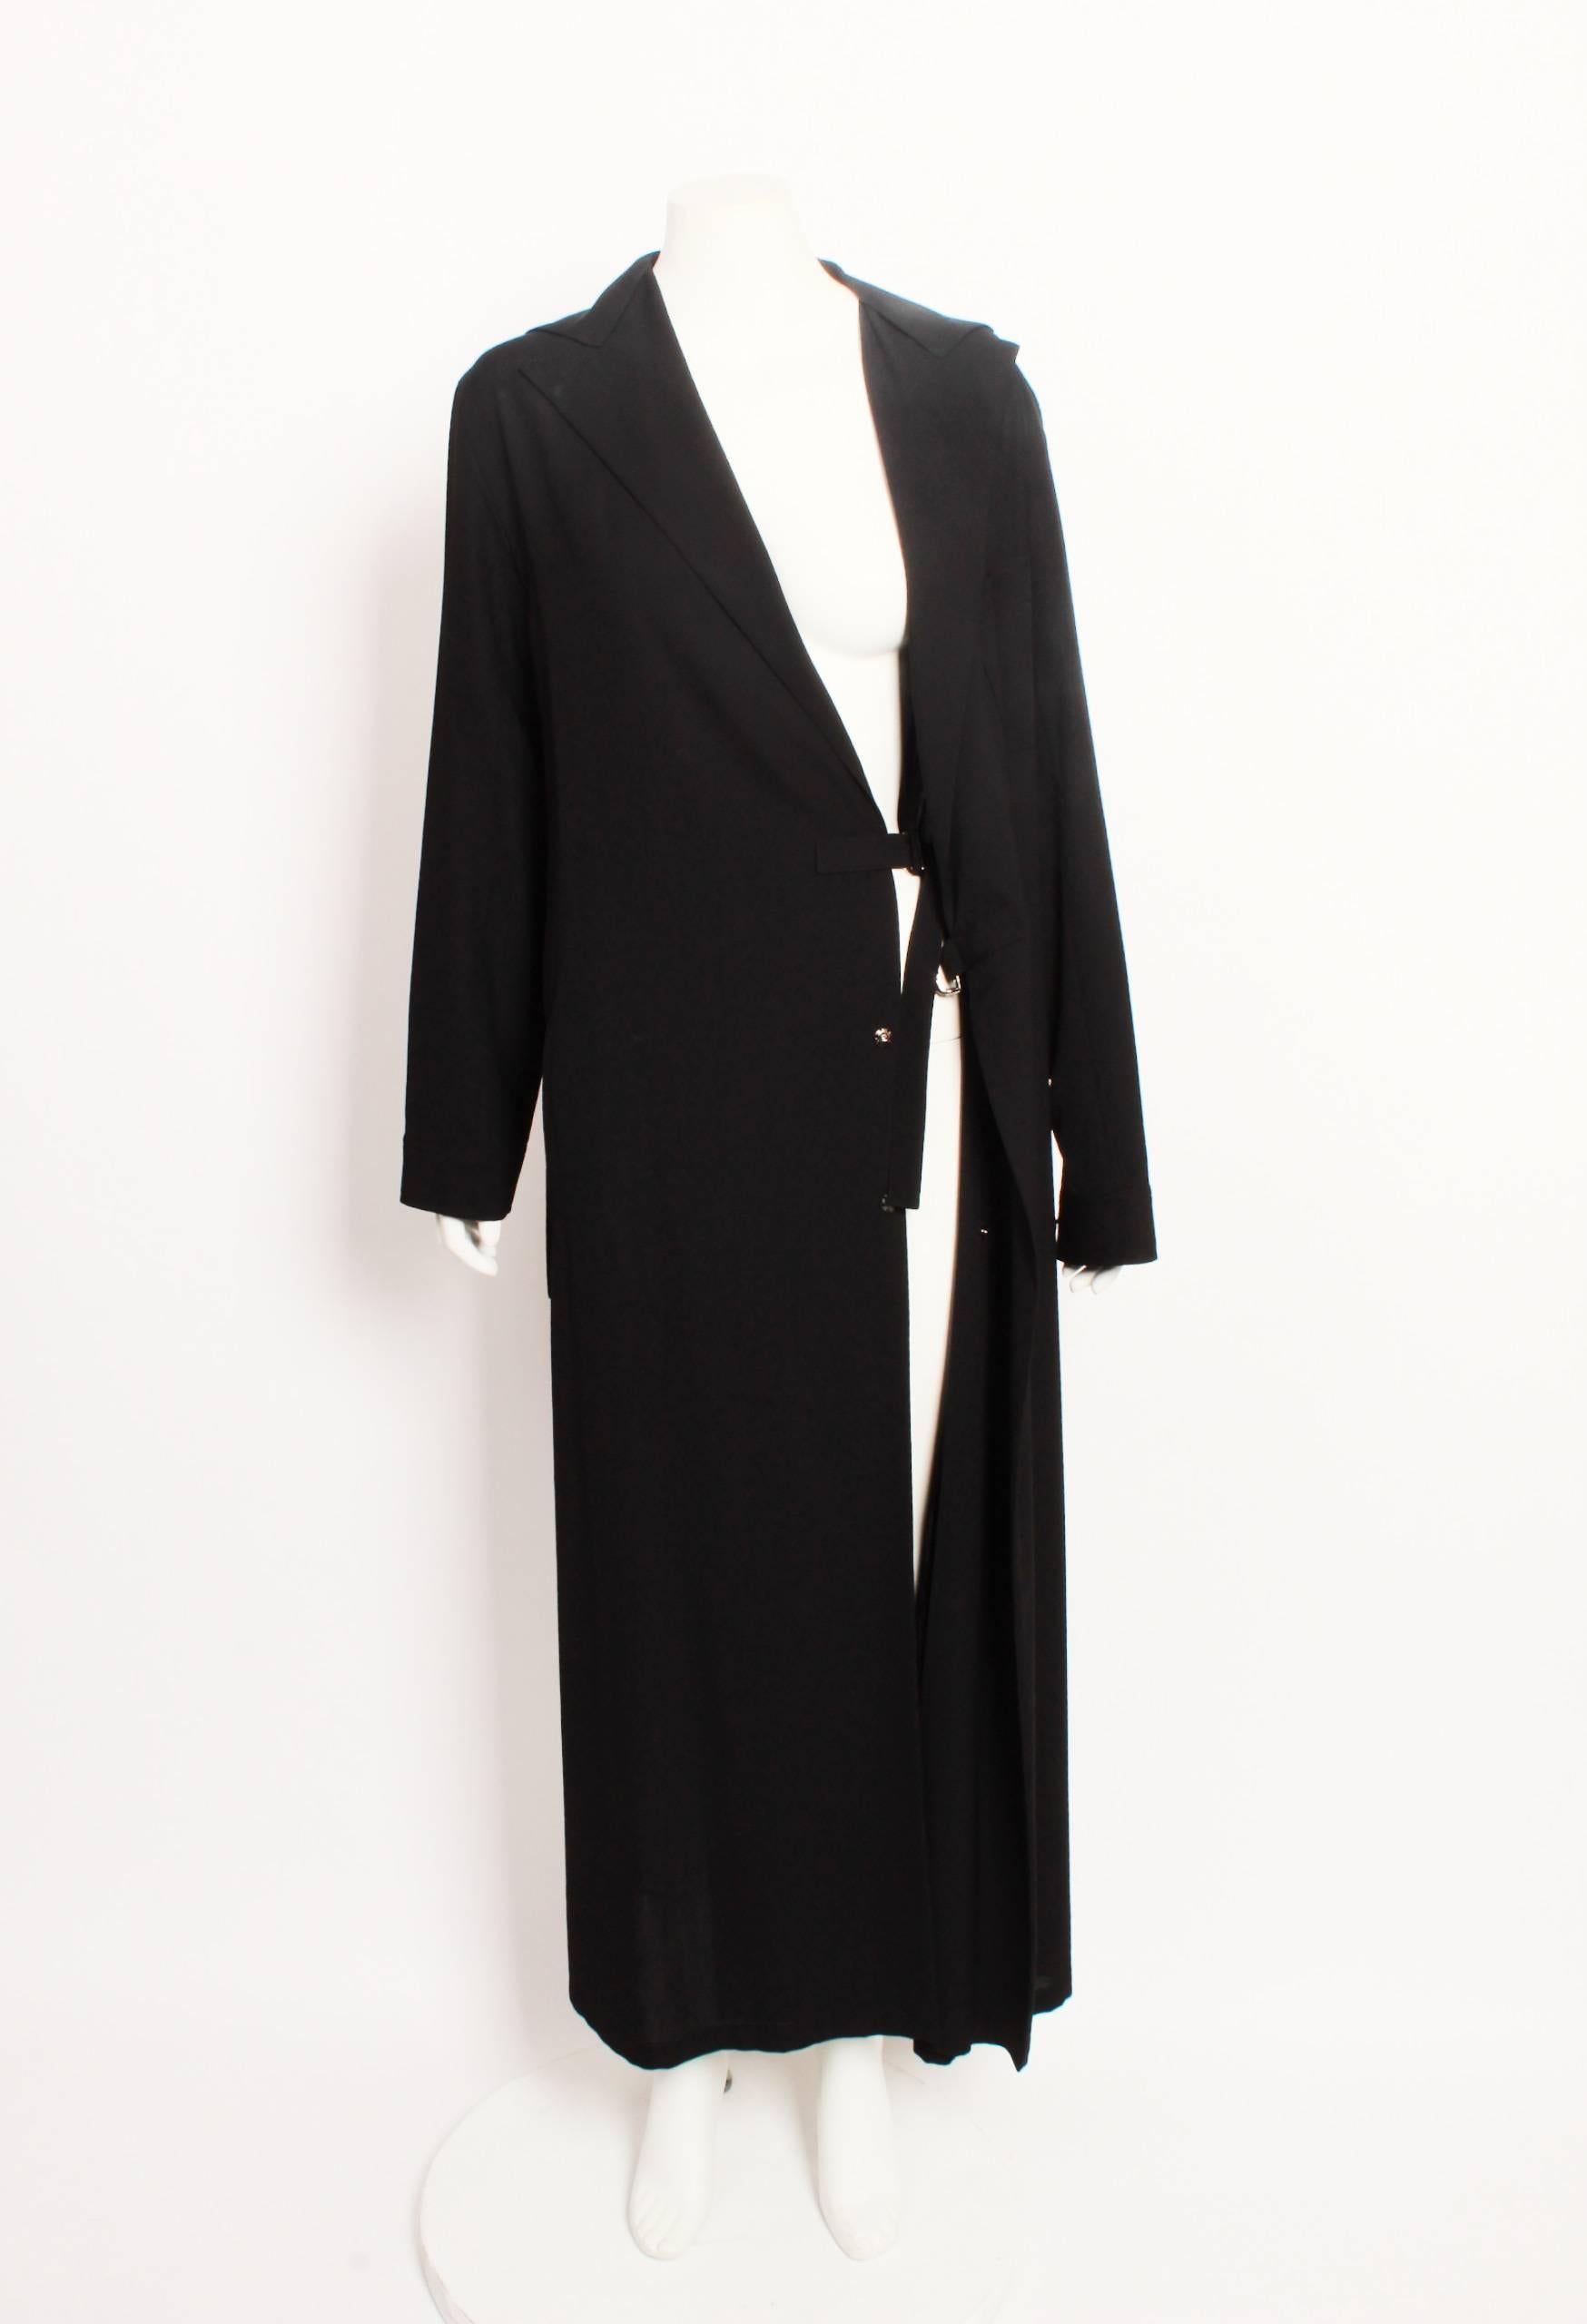 Yohji Yamamoto black wool blend coat with buckle detail.
Y's Collection. Made in Japan. Size 4.